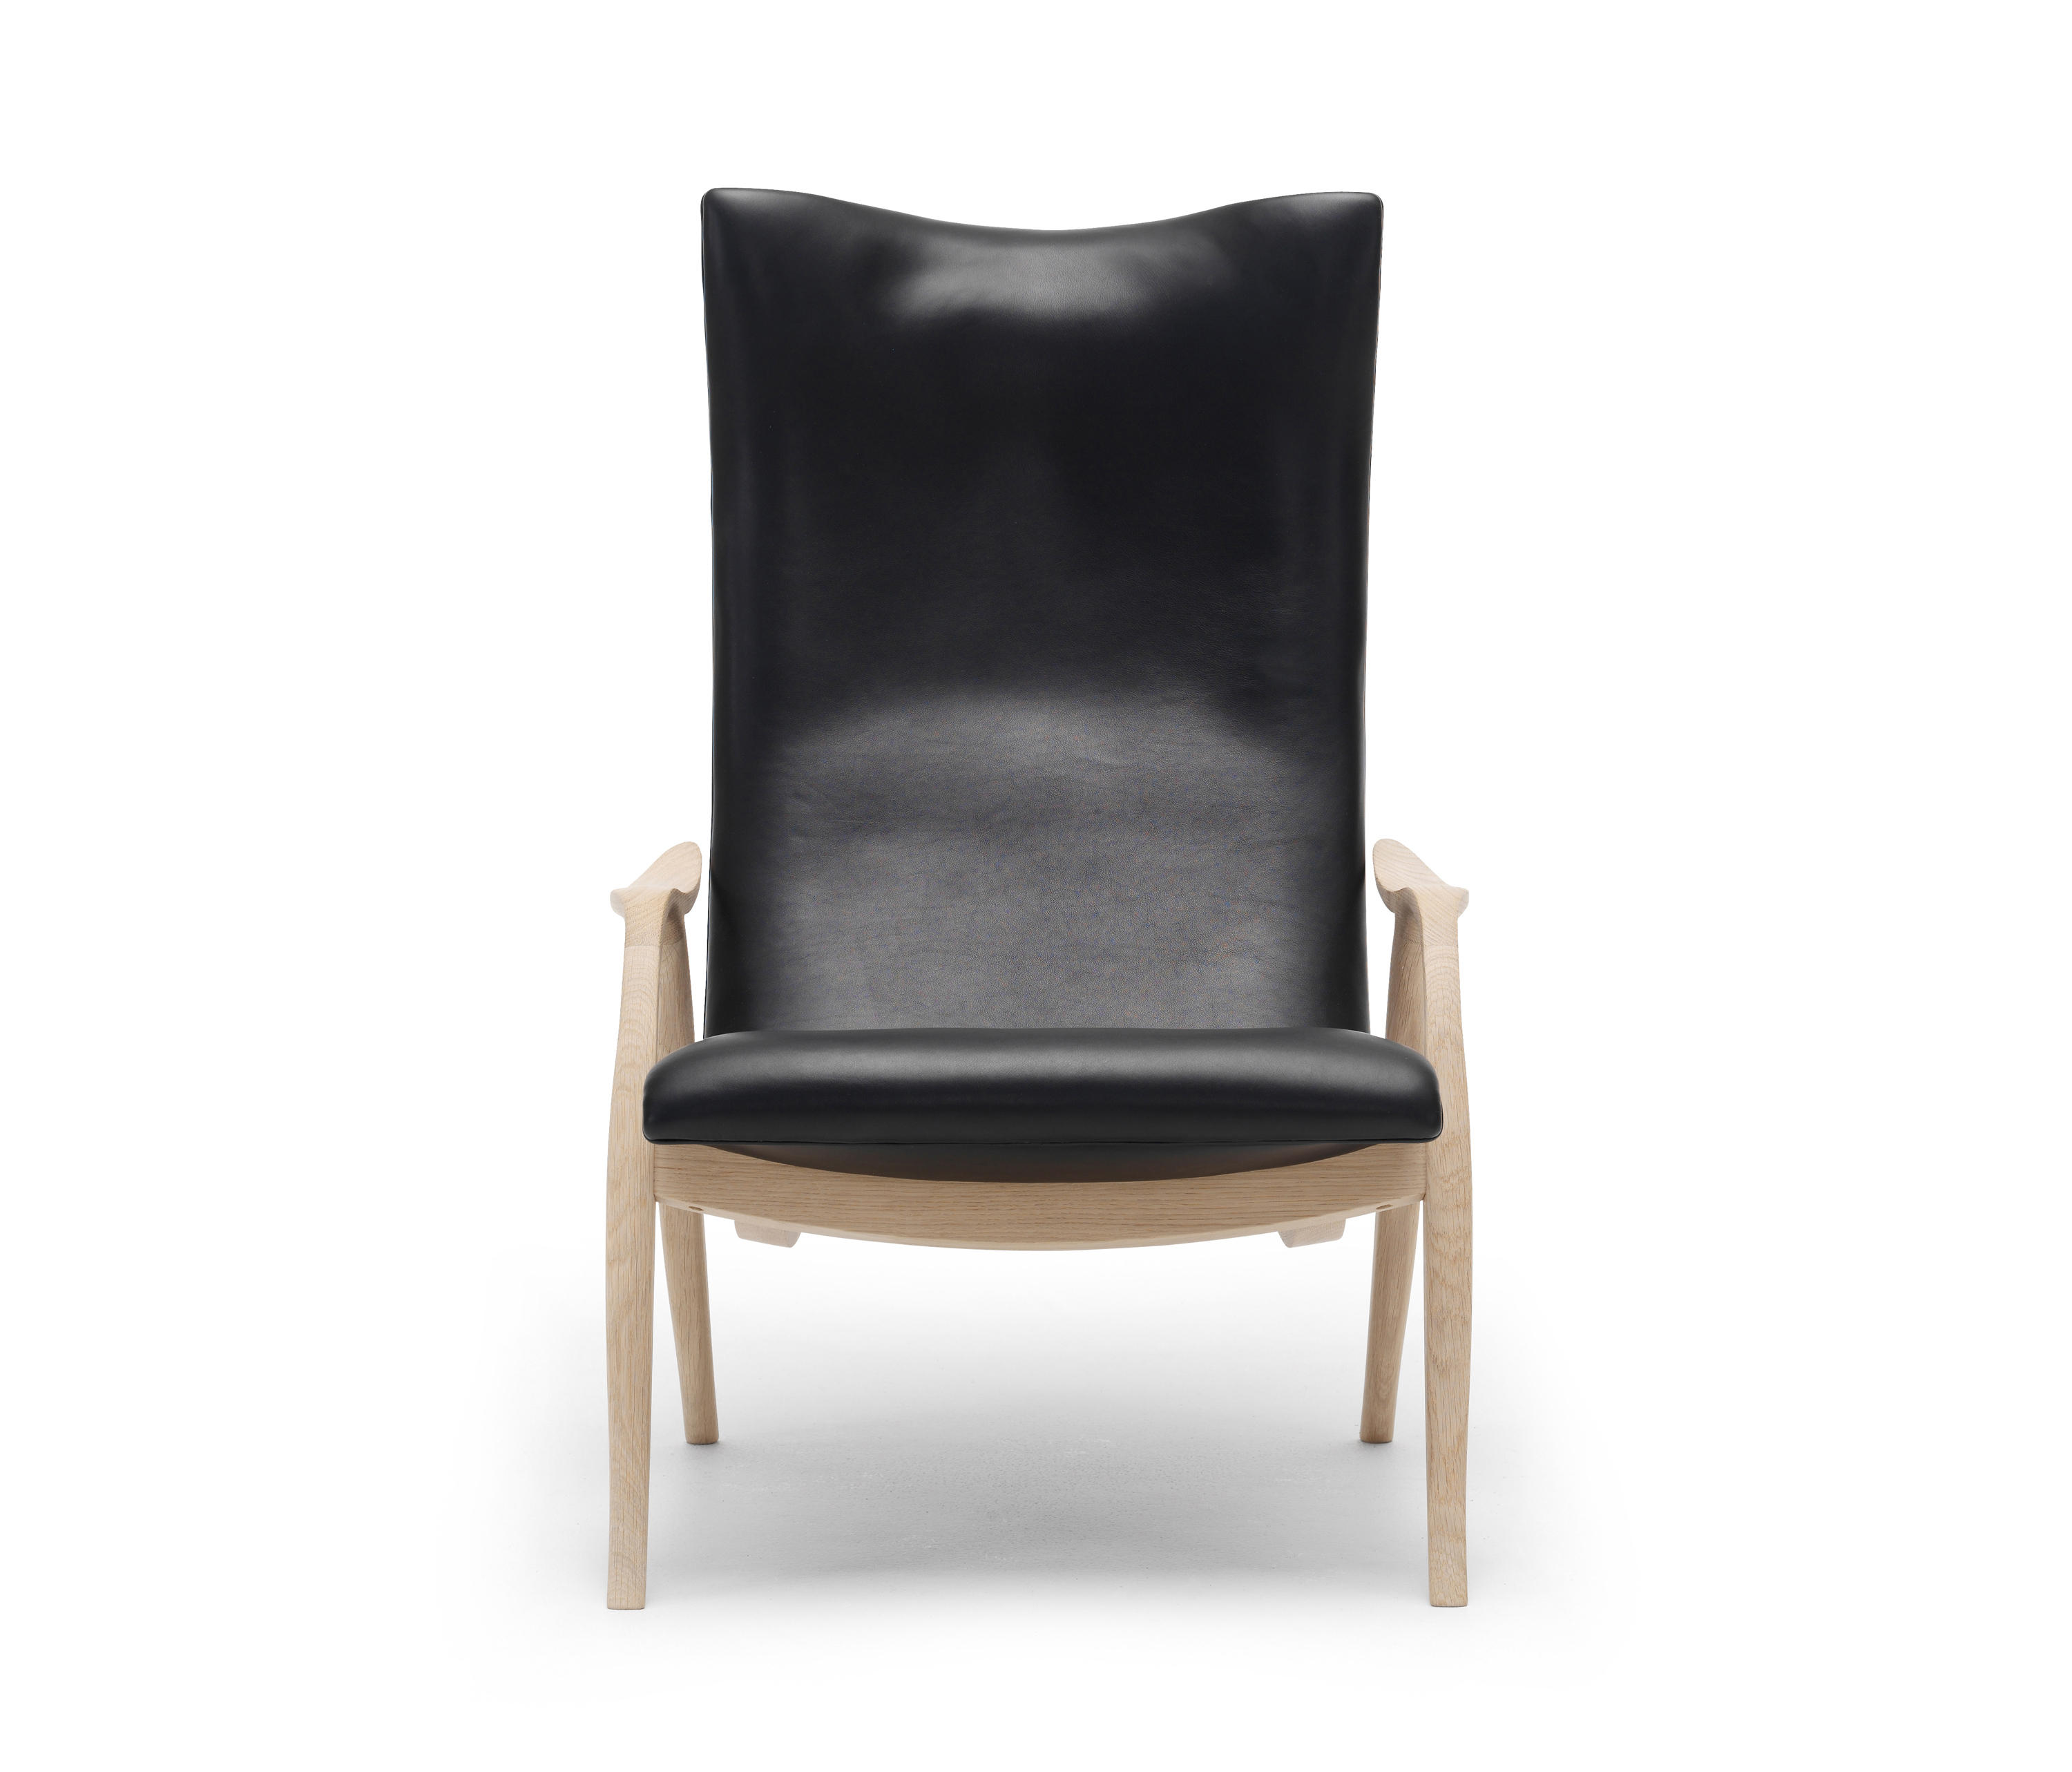 Signature Chair by Frits Henningsen